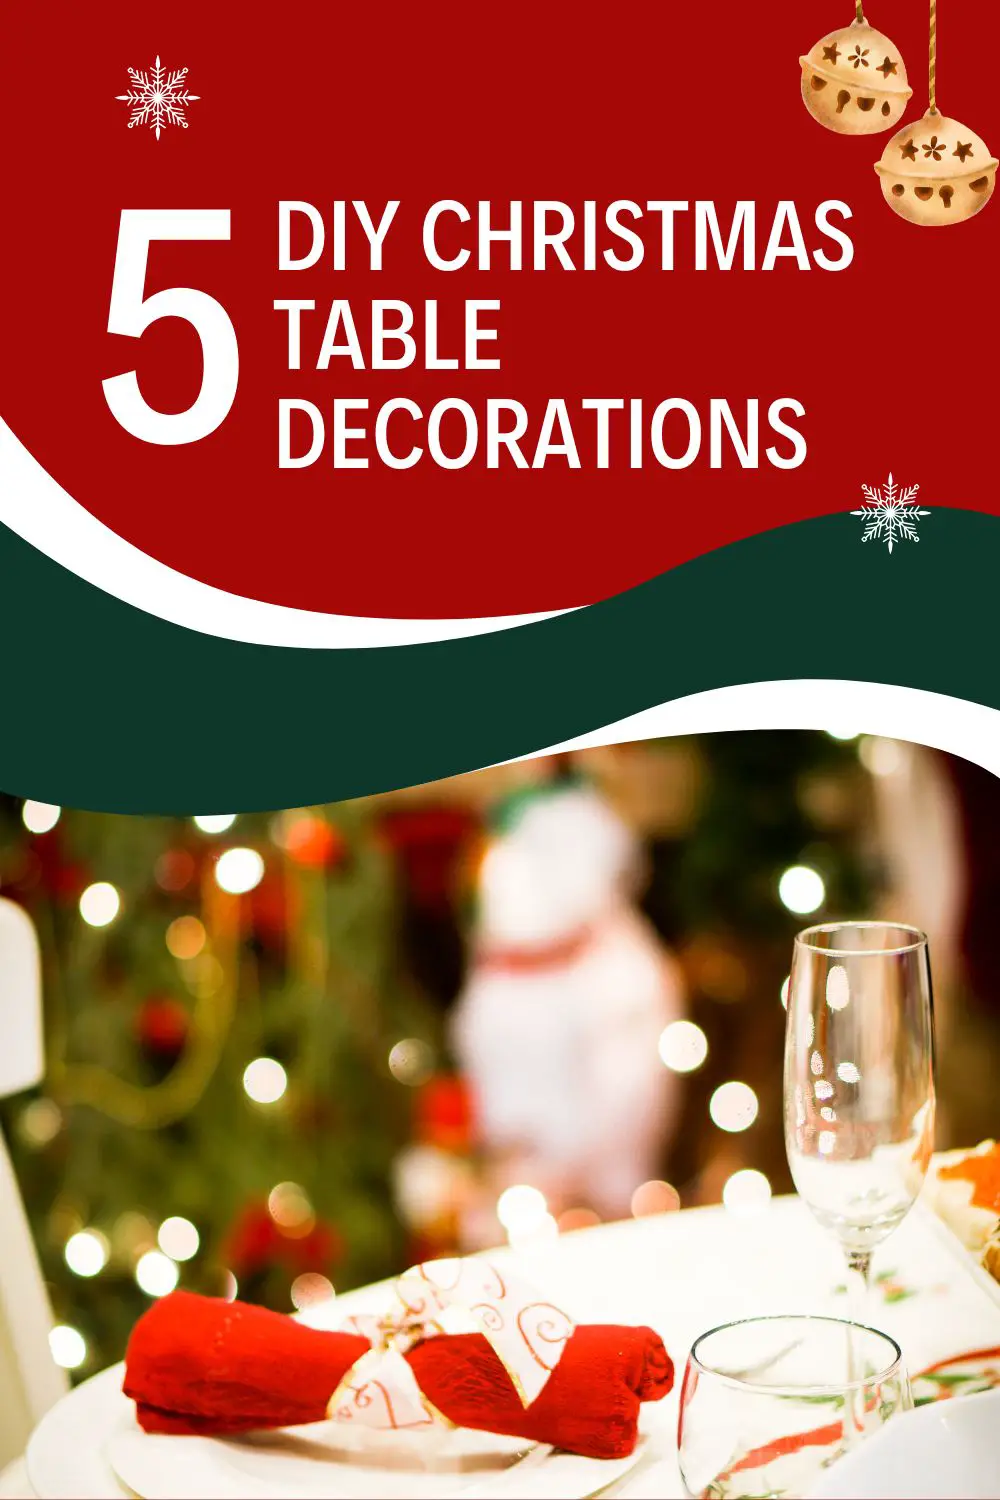 5 DIY Christmas Table Decorations That Will Wow Your Guests